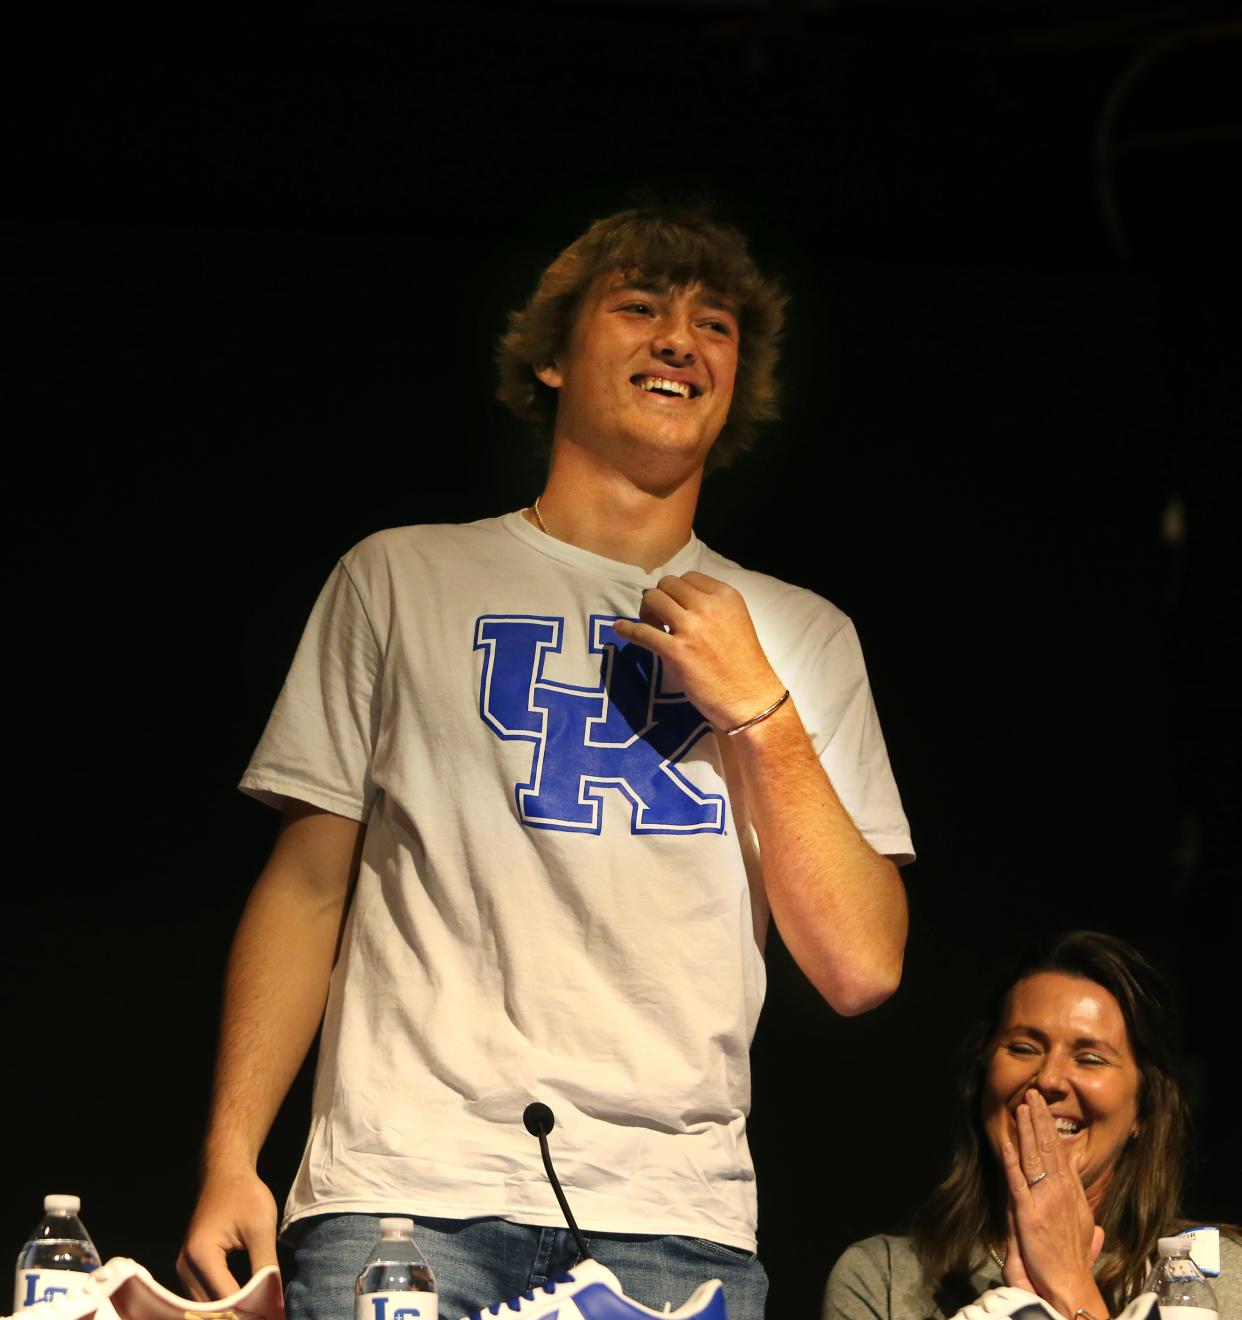 Cutter Boley selected the University of Kentucky during a ceremony at Lexington Christian Academy in May.